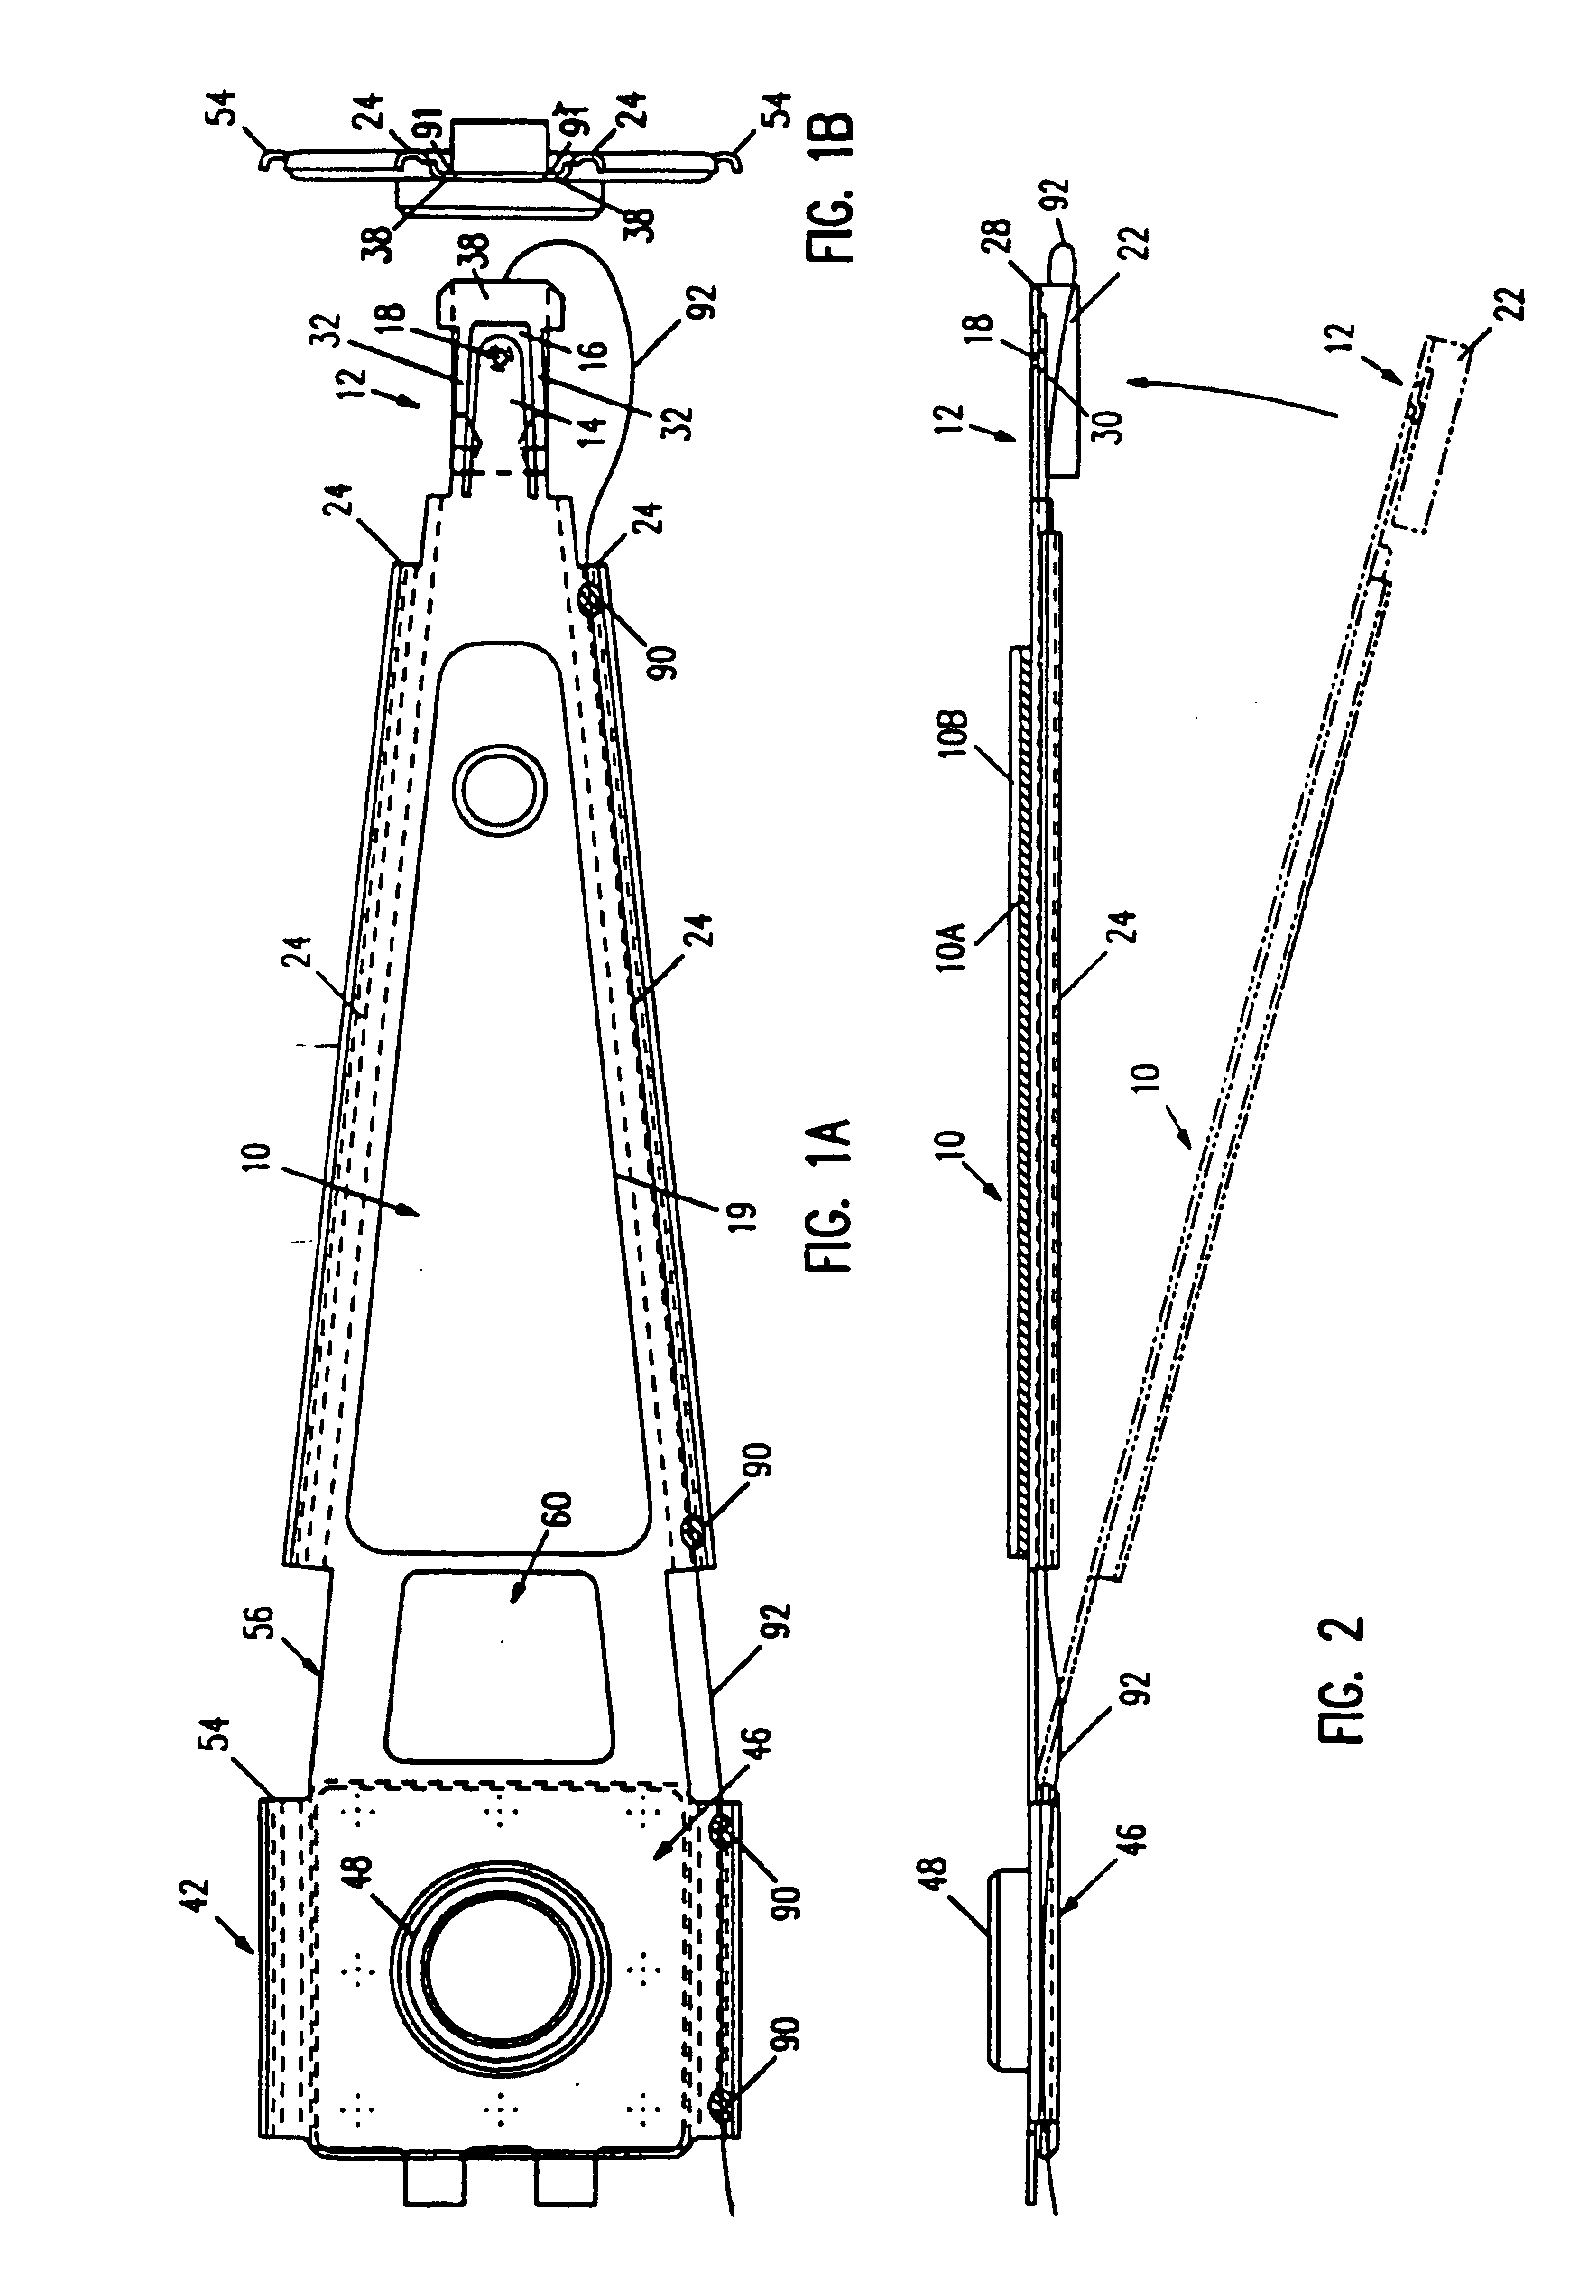 Magnetic head suspension assembly fabricated with integral load beam and flexure